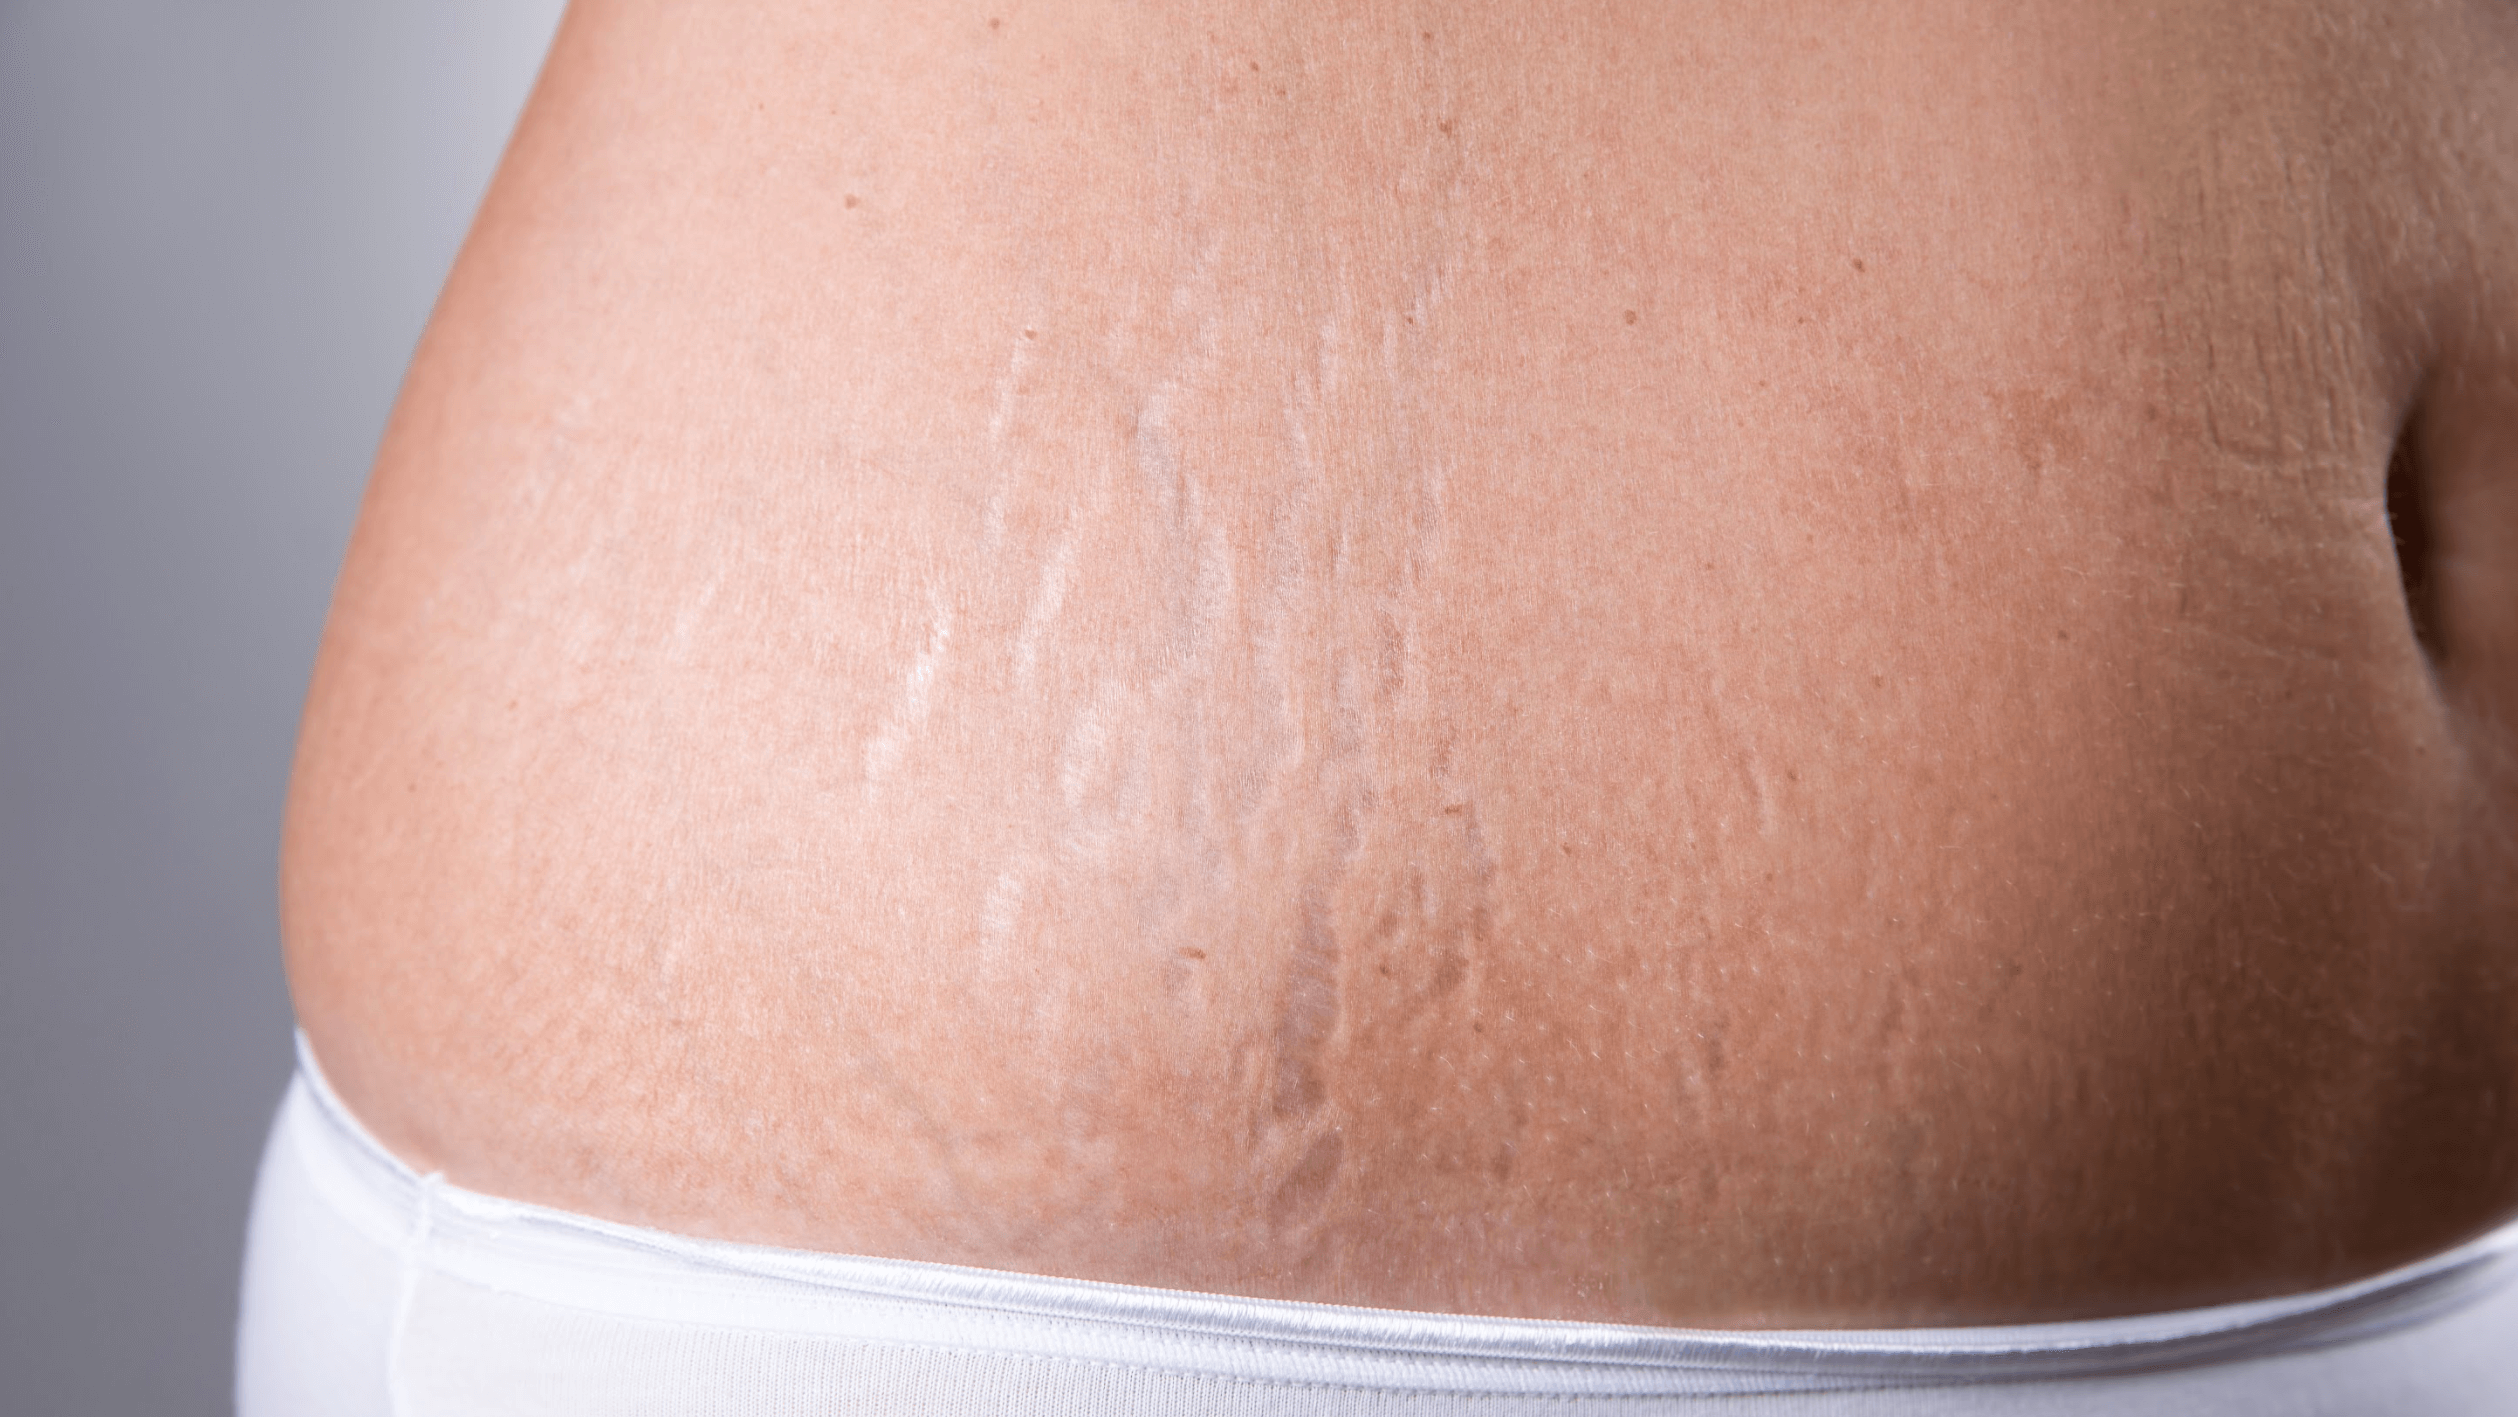 Micro-Needling Stretch Marks: How To Get Rid Of This?